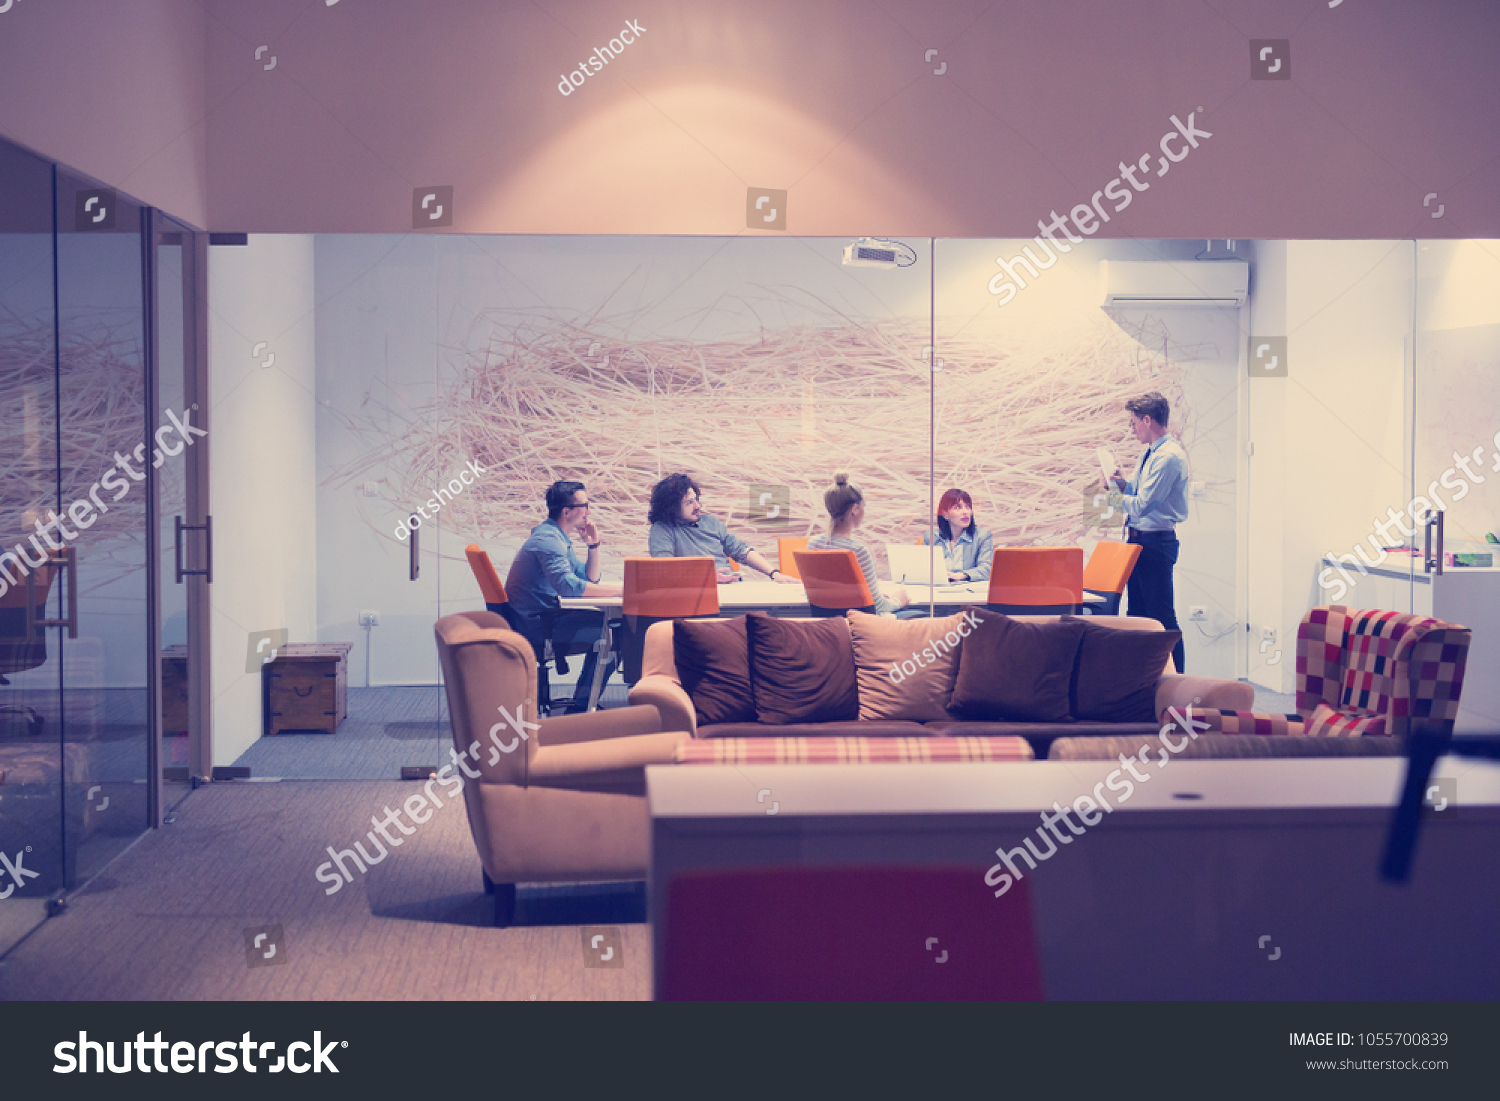 Group of business people discussing business plan  in the office #1055700839